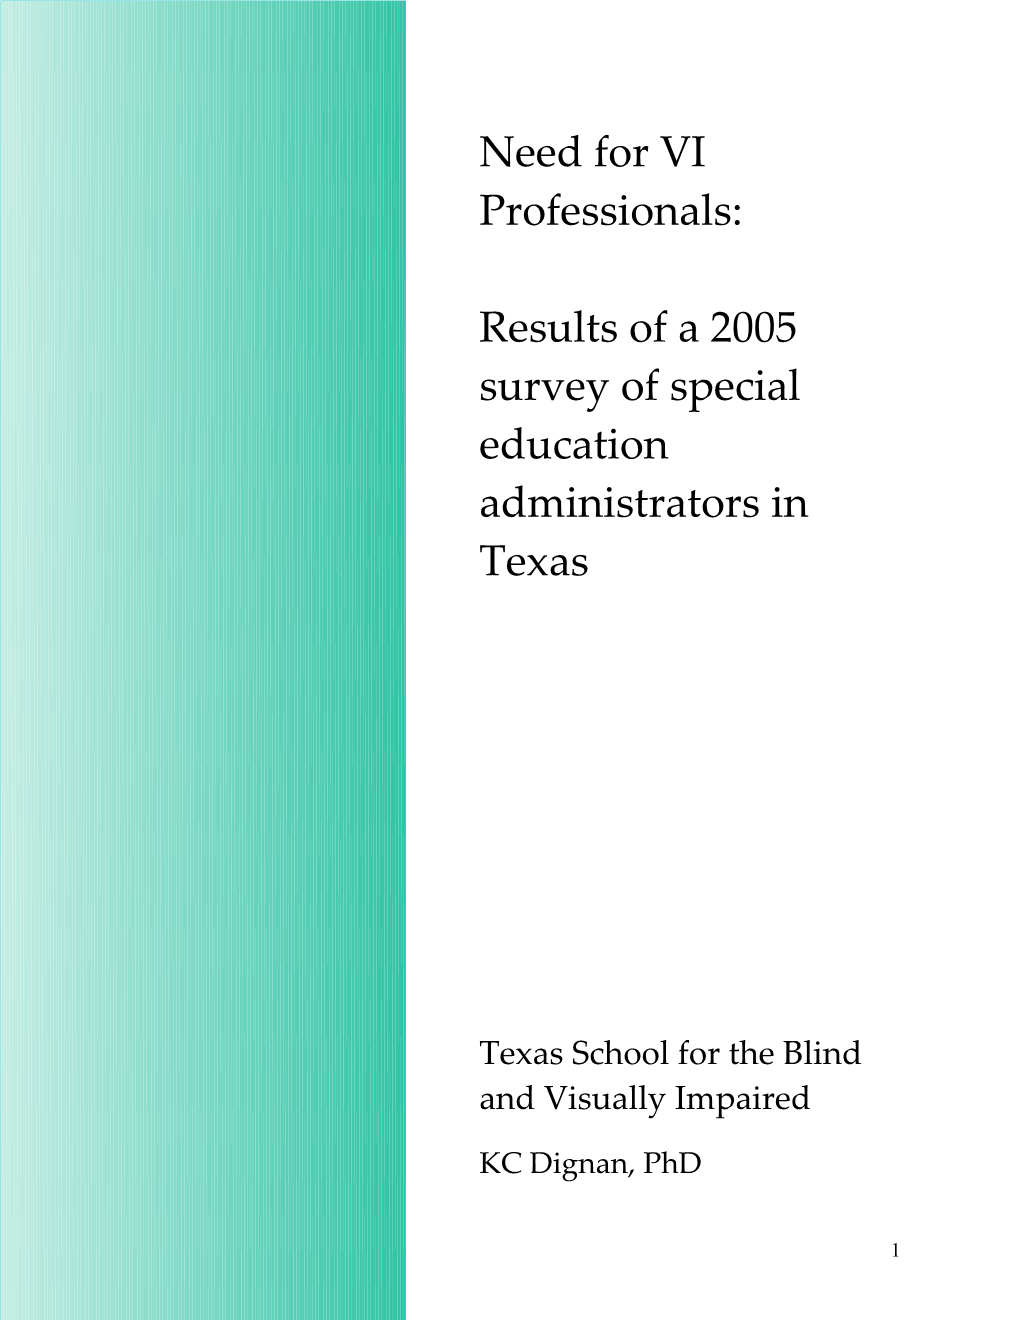 Need for VI Professionals: Results of a Survey of Special Education Administrators